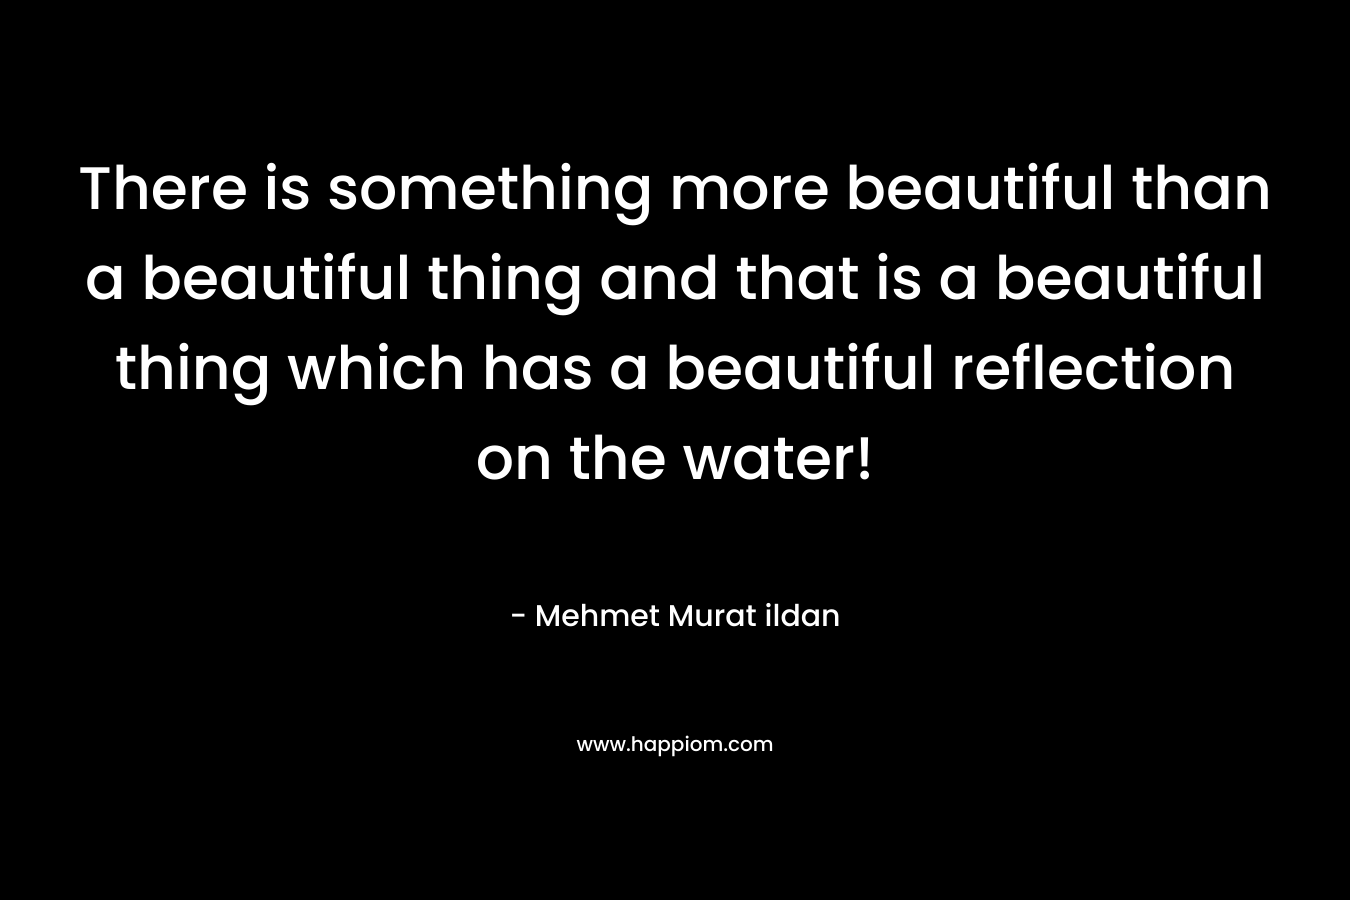 There is something more beautiful than a beautiful thing and that is a beautiful thing which has a beautiful reflection on the water!